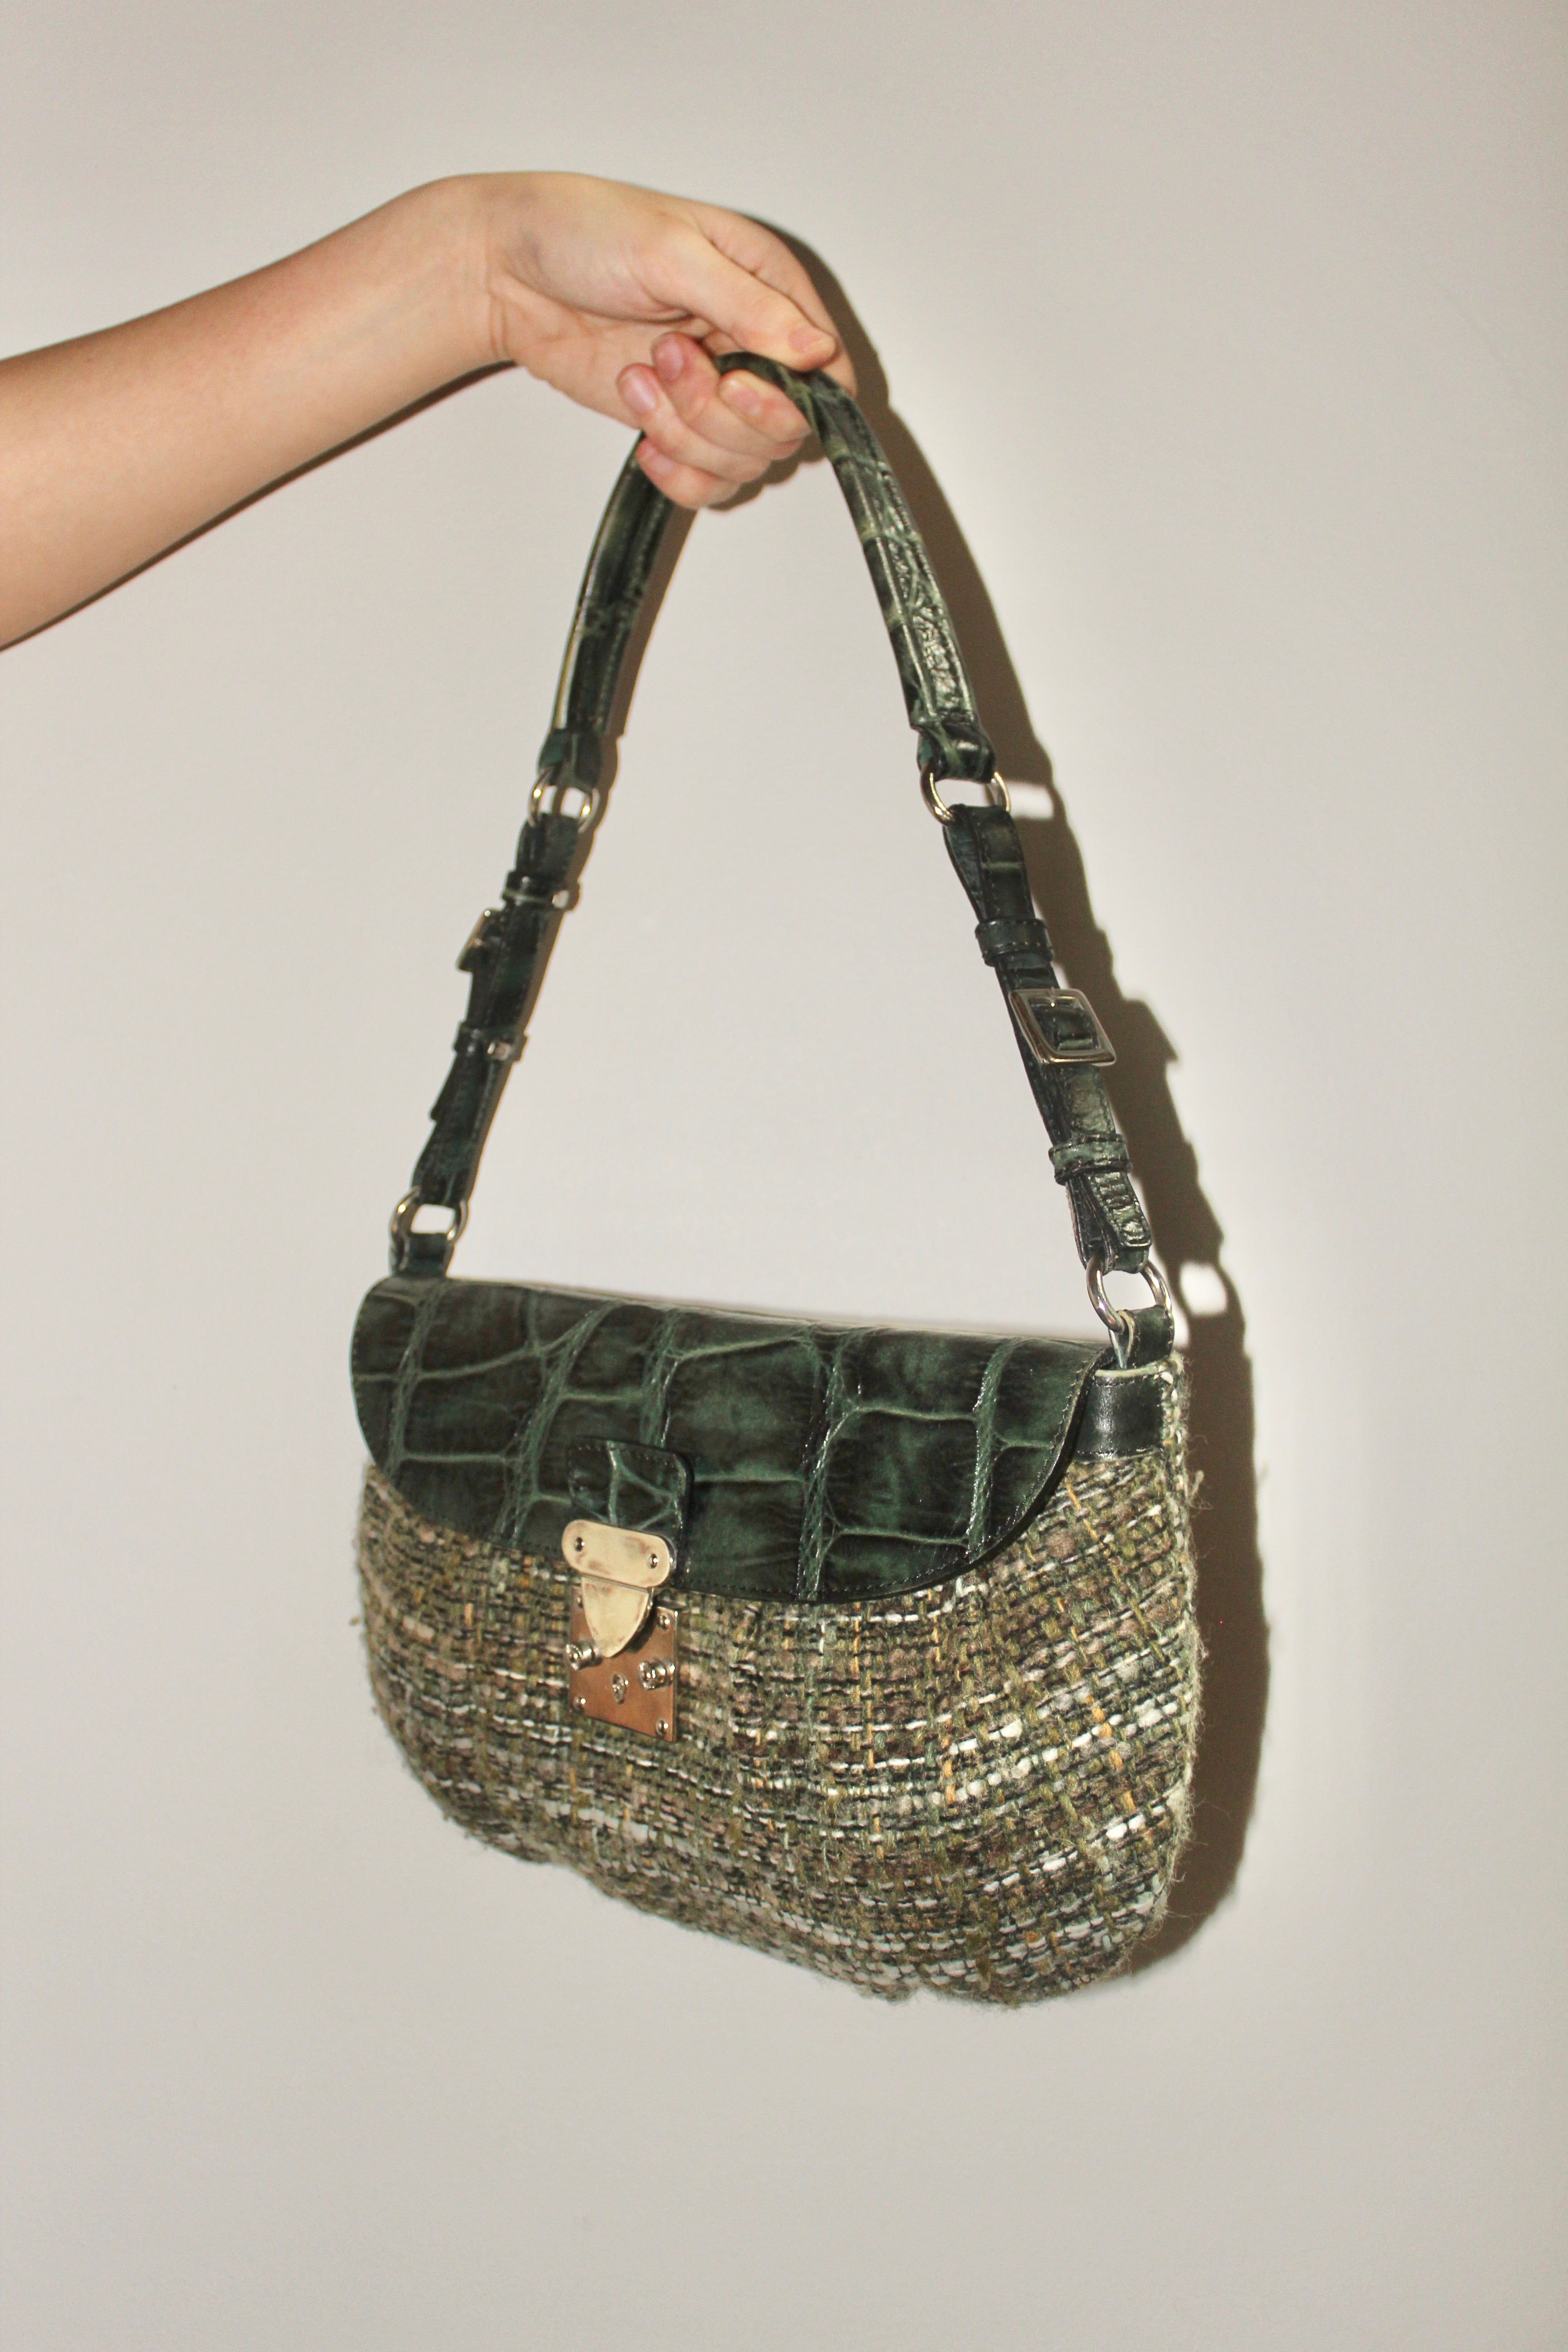 Vintage French Emerald Textured Purse